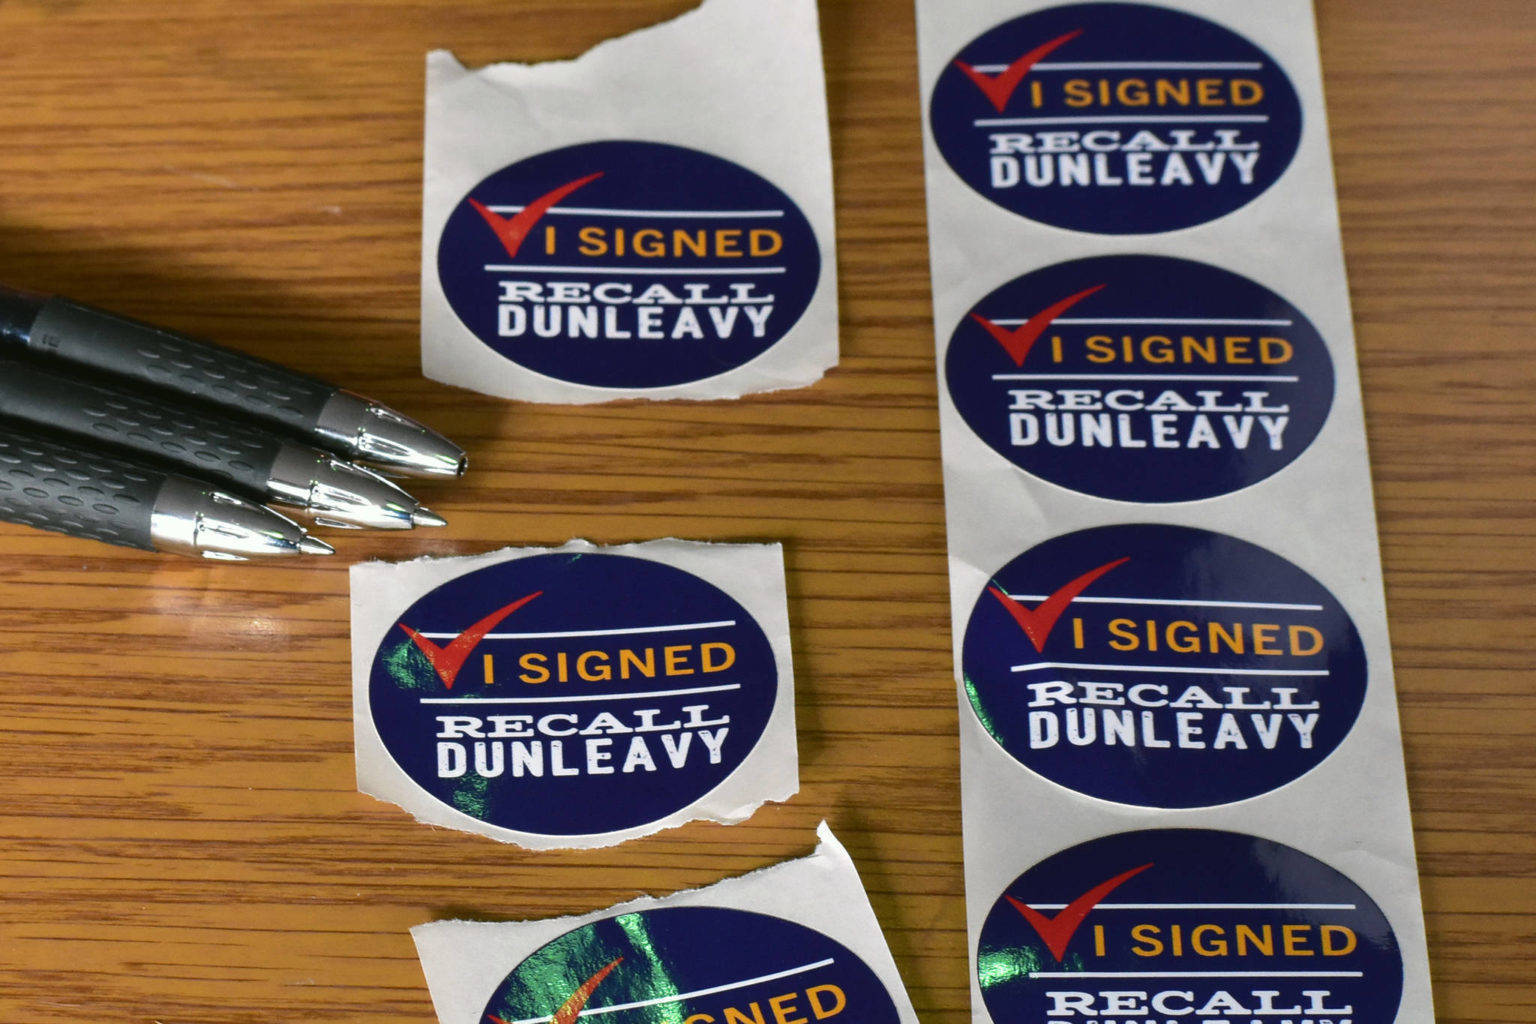 The group Recall Dunleavy needed roughly 30,000 more signatures by Tuesday to ensure a spot on the Nov. 3 ballot. (Peter Segall | Juneau Empire file)